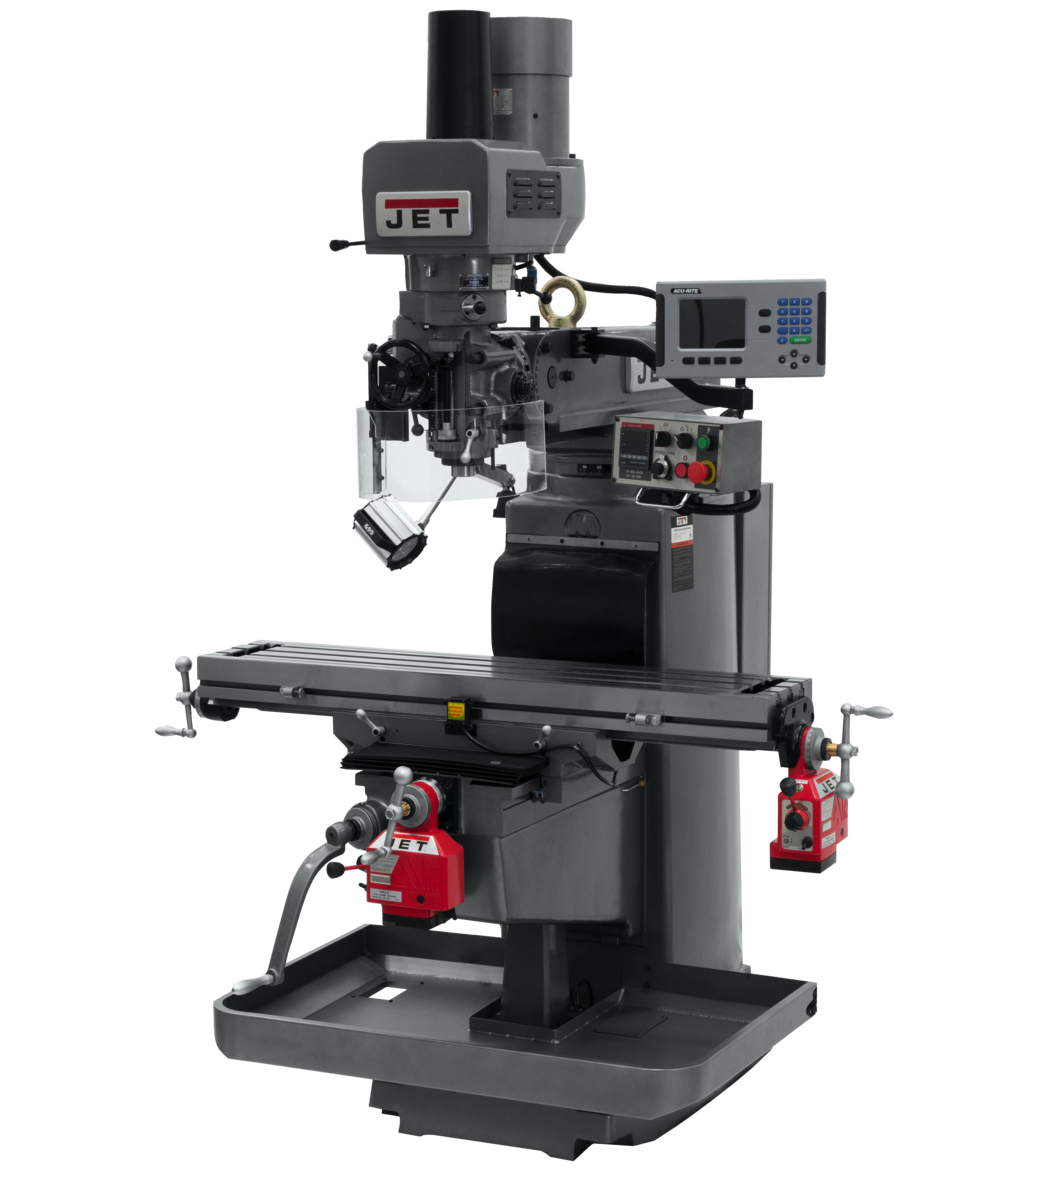 JTM-1050EVS2/230 Mill With 3-Axis Acu-Rite 203 DRO (Knee) With X and Y-Axis Powerfeeds and Air Powe